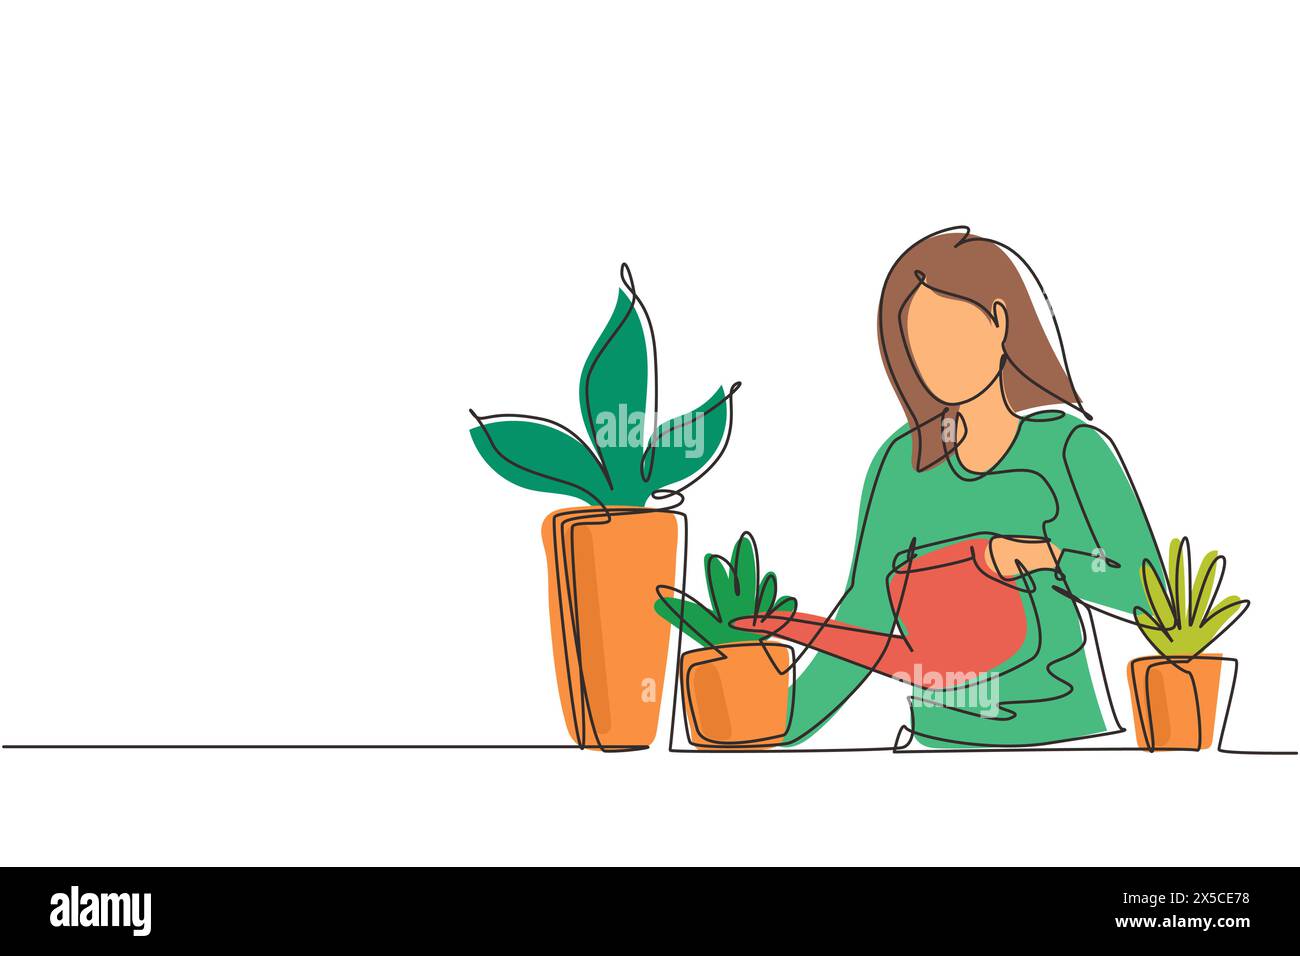 Single one line drawing woman watering houseplants at home. Home garden and house plants concept. Girl taking care of houseplants growing in planters. Stock Vector